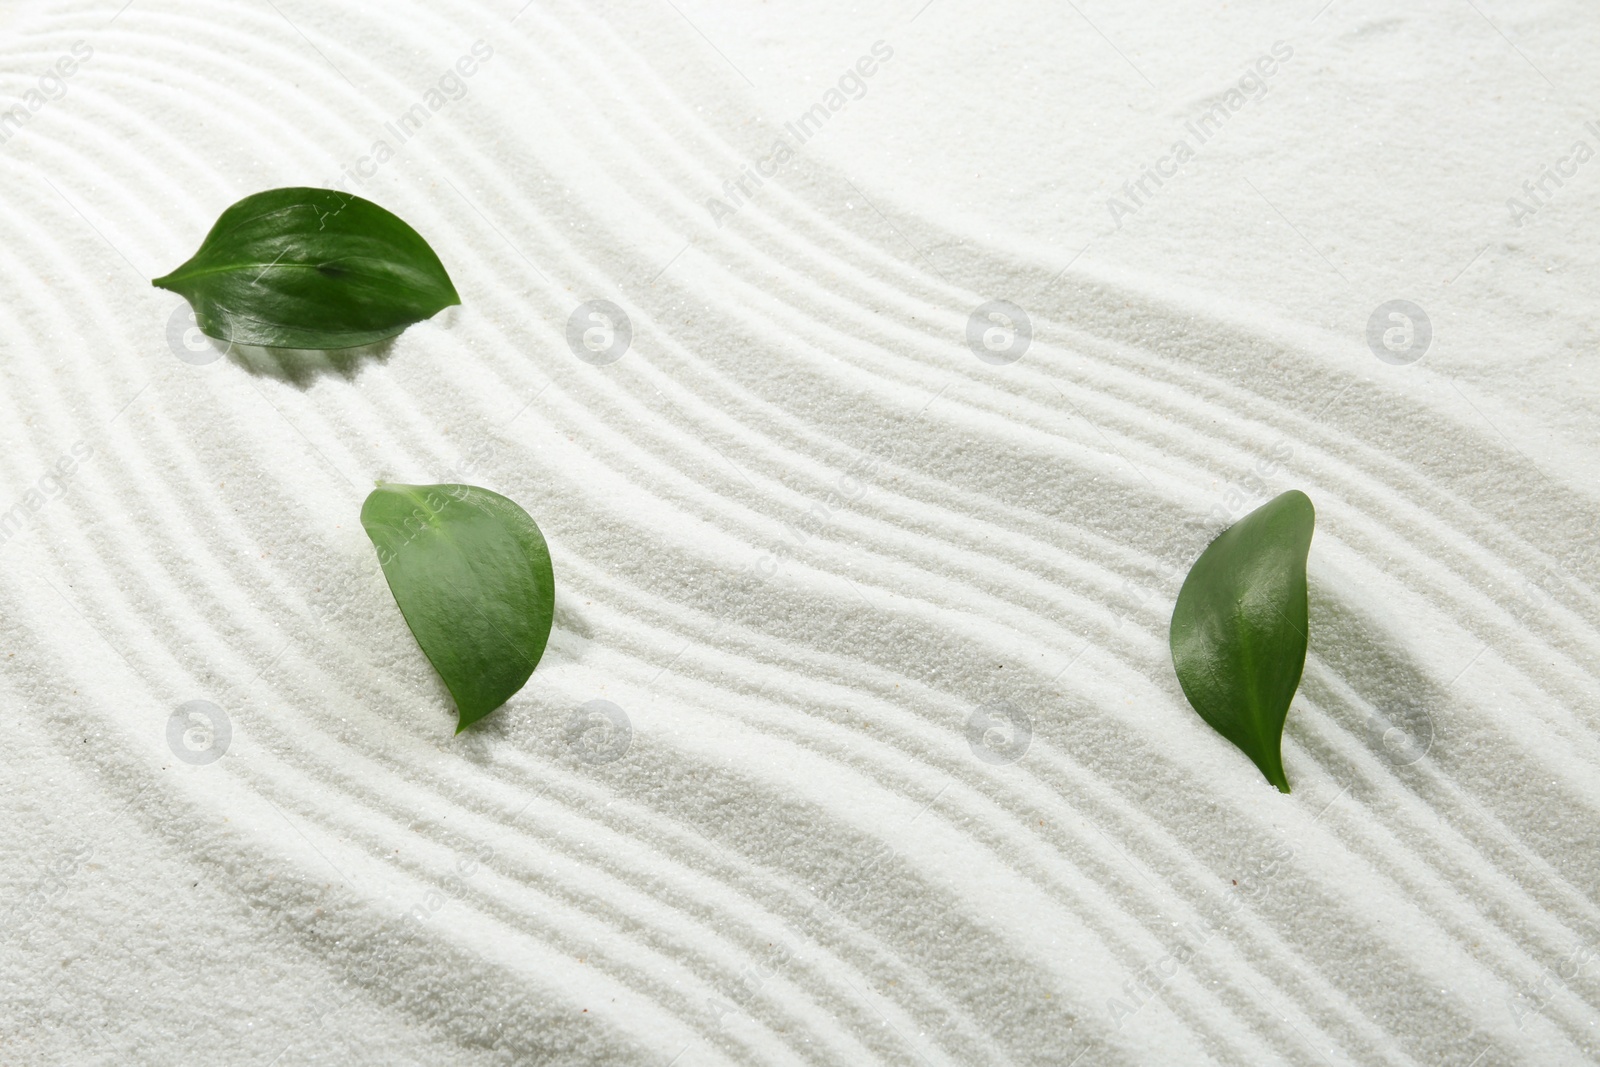 Photo of Zen rock garden. Wave pattern and green leaves on white sand